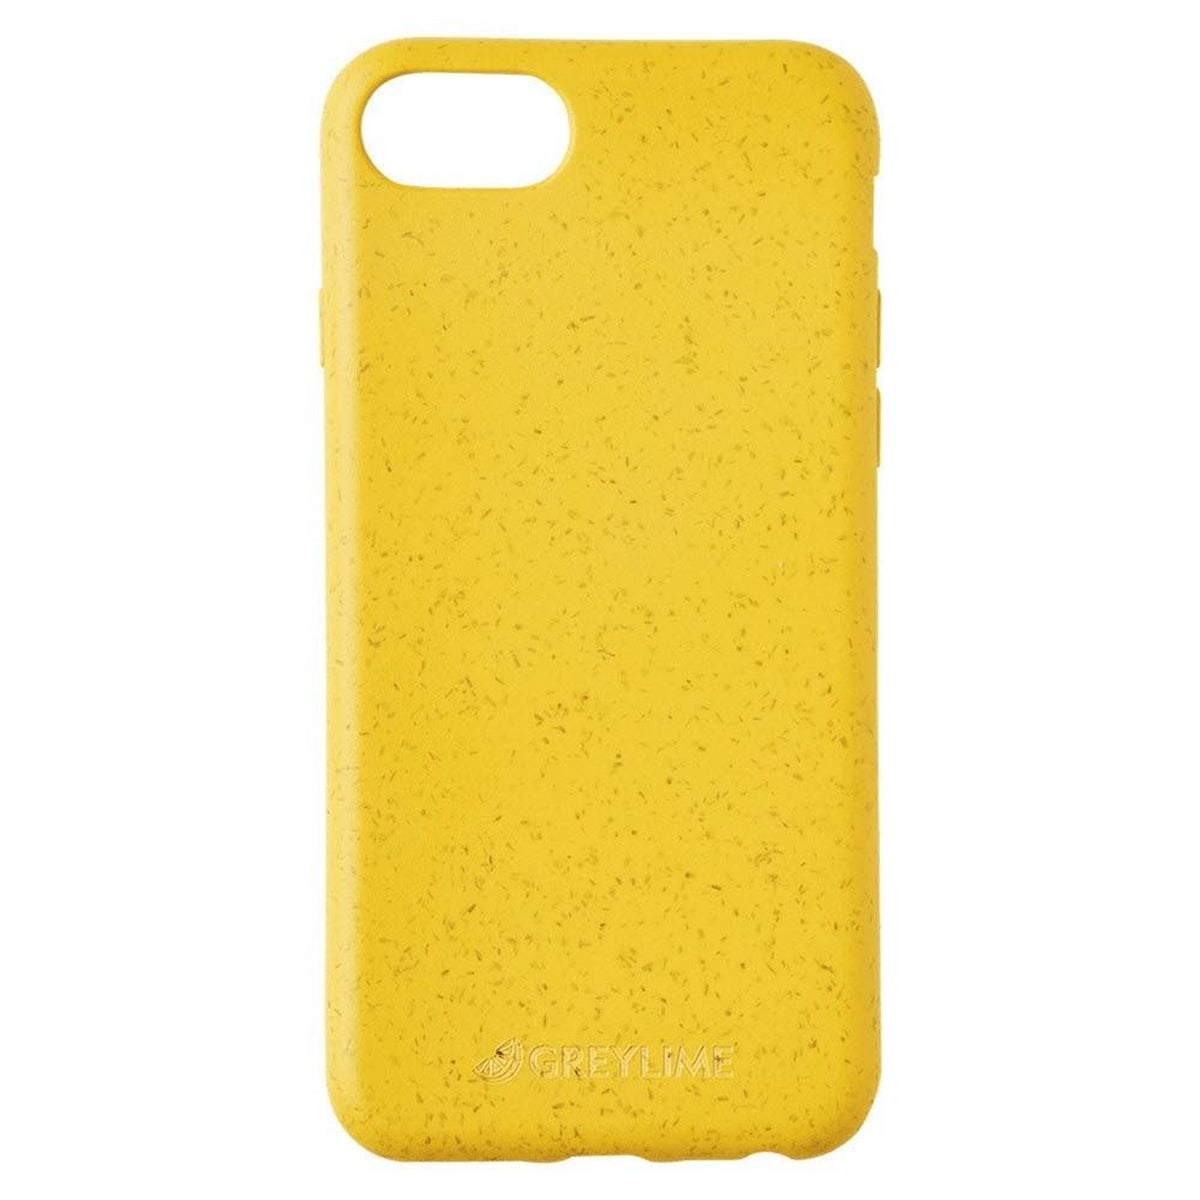 GreyLime-iPhone-6-7-8-SE-Biodegradable-Cover-Yellow-COIP67806-V3.jpg